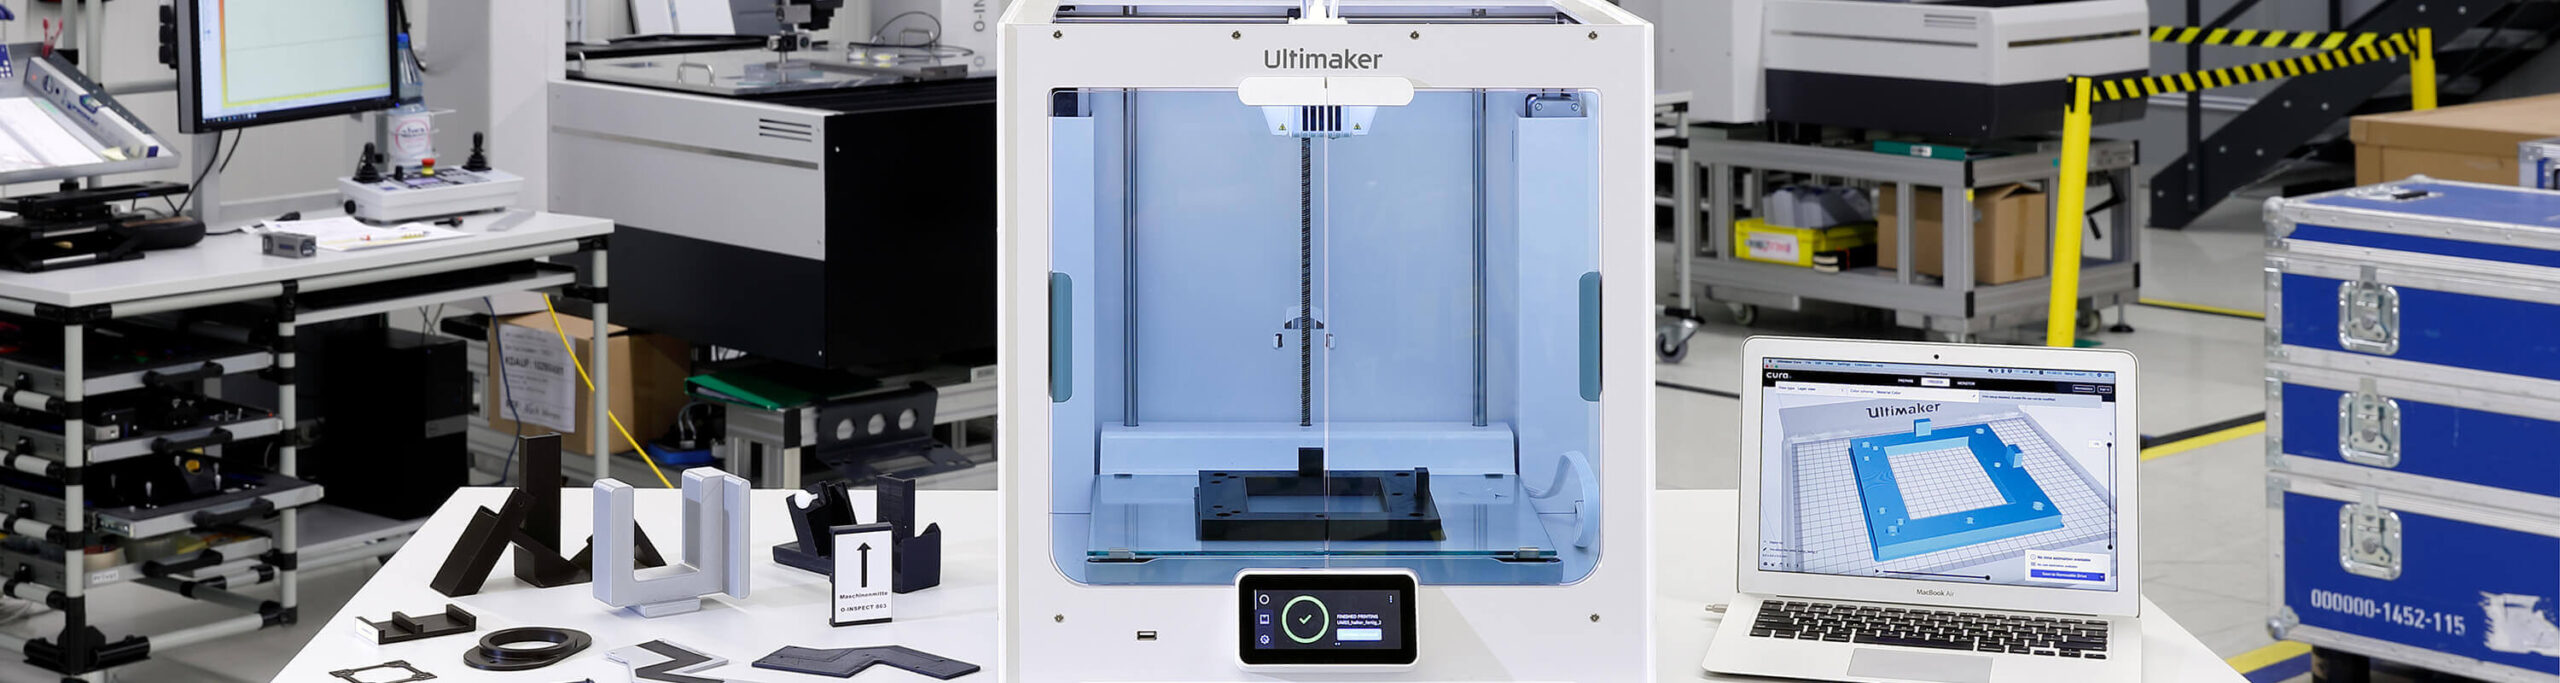 A 3D printer with software and parts printed in several materials